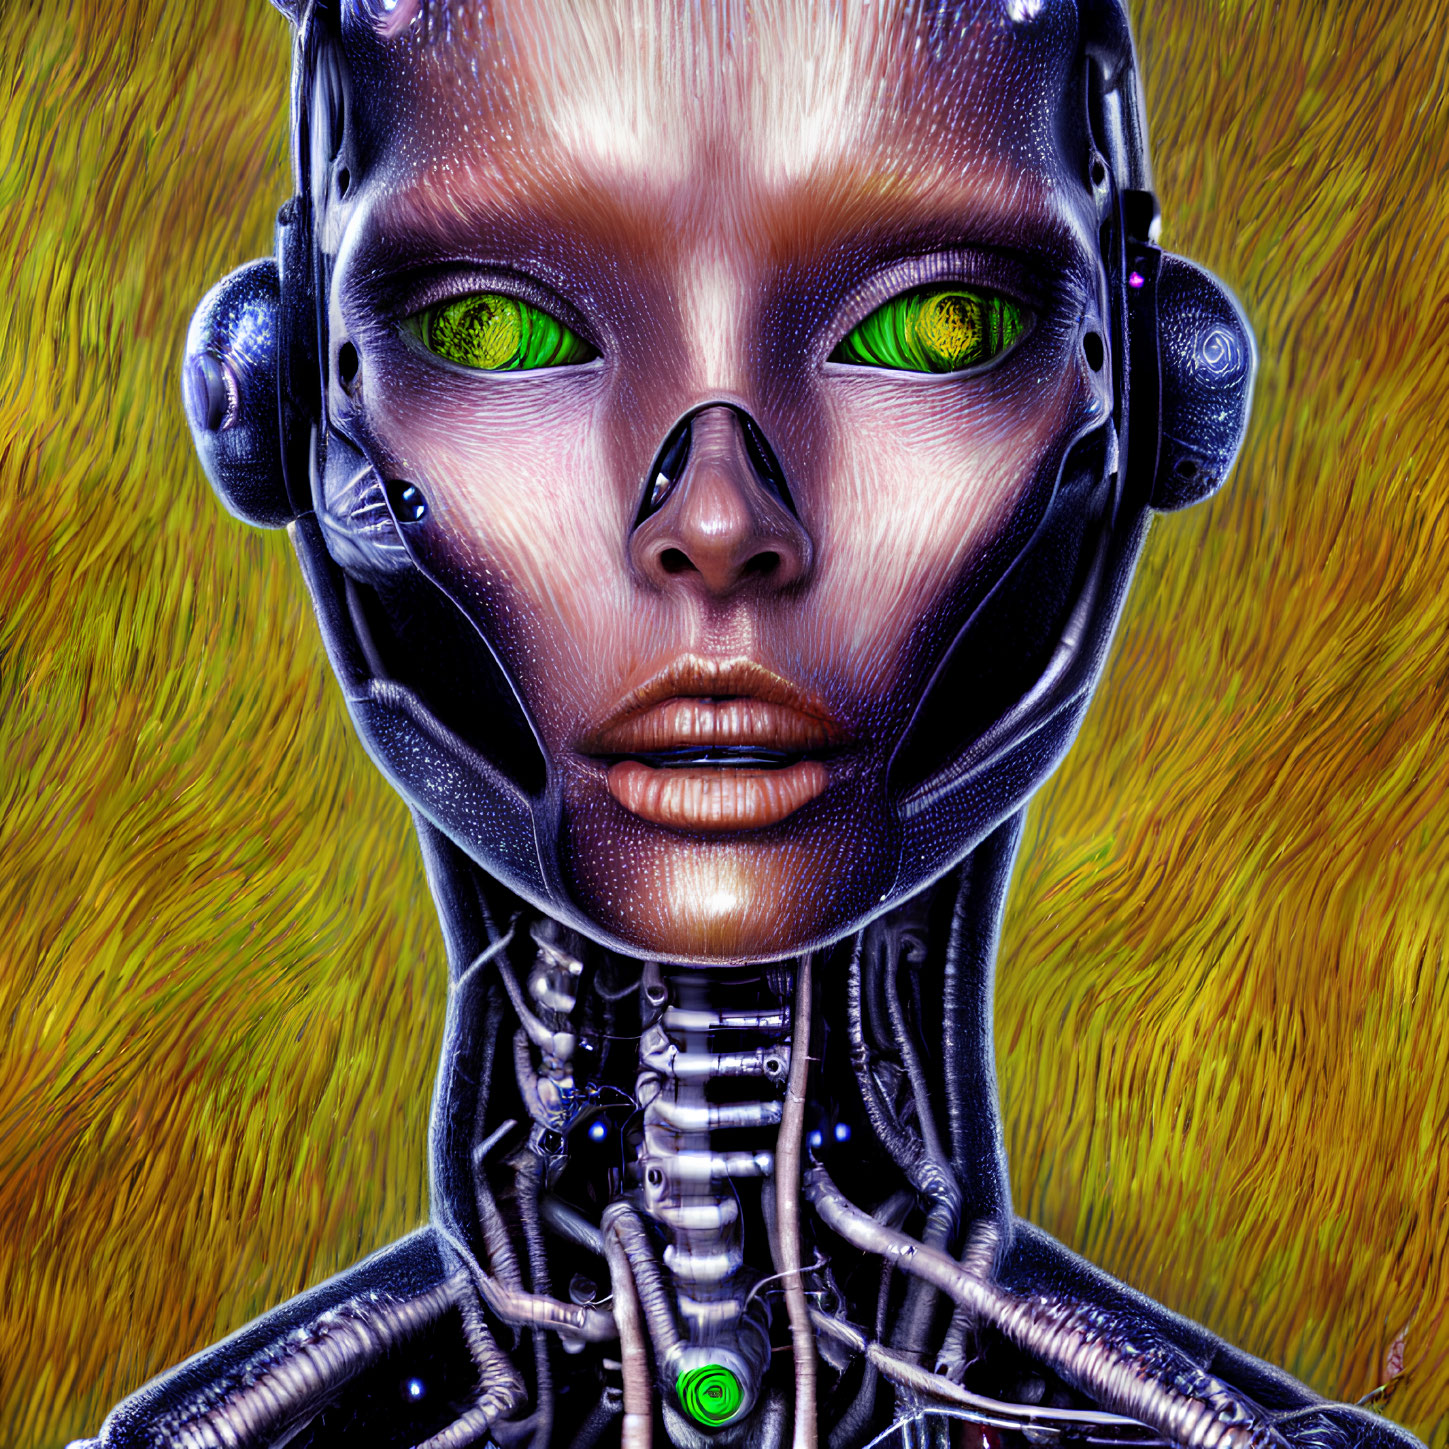 Detailed humanoid robot with green eyes and hybrid design